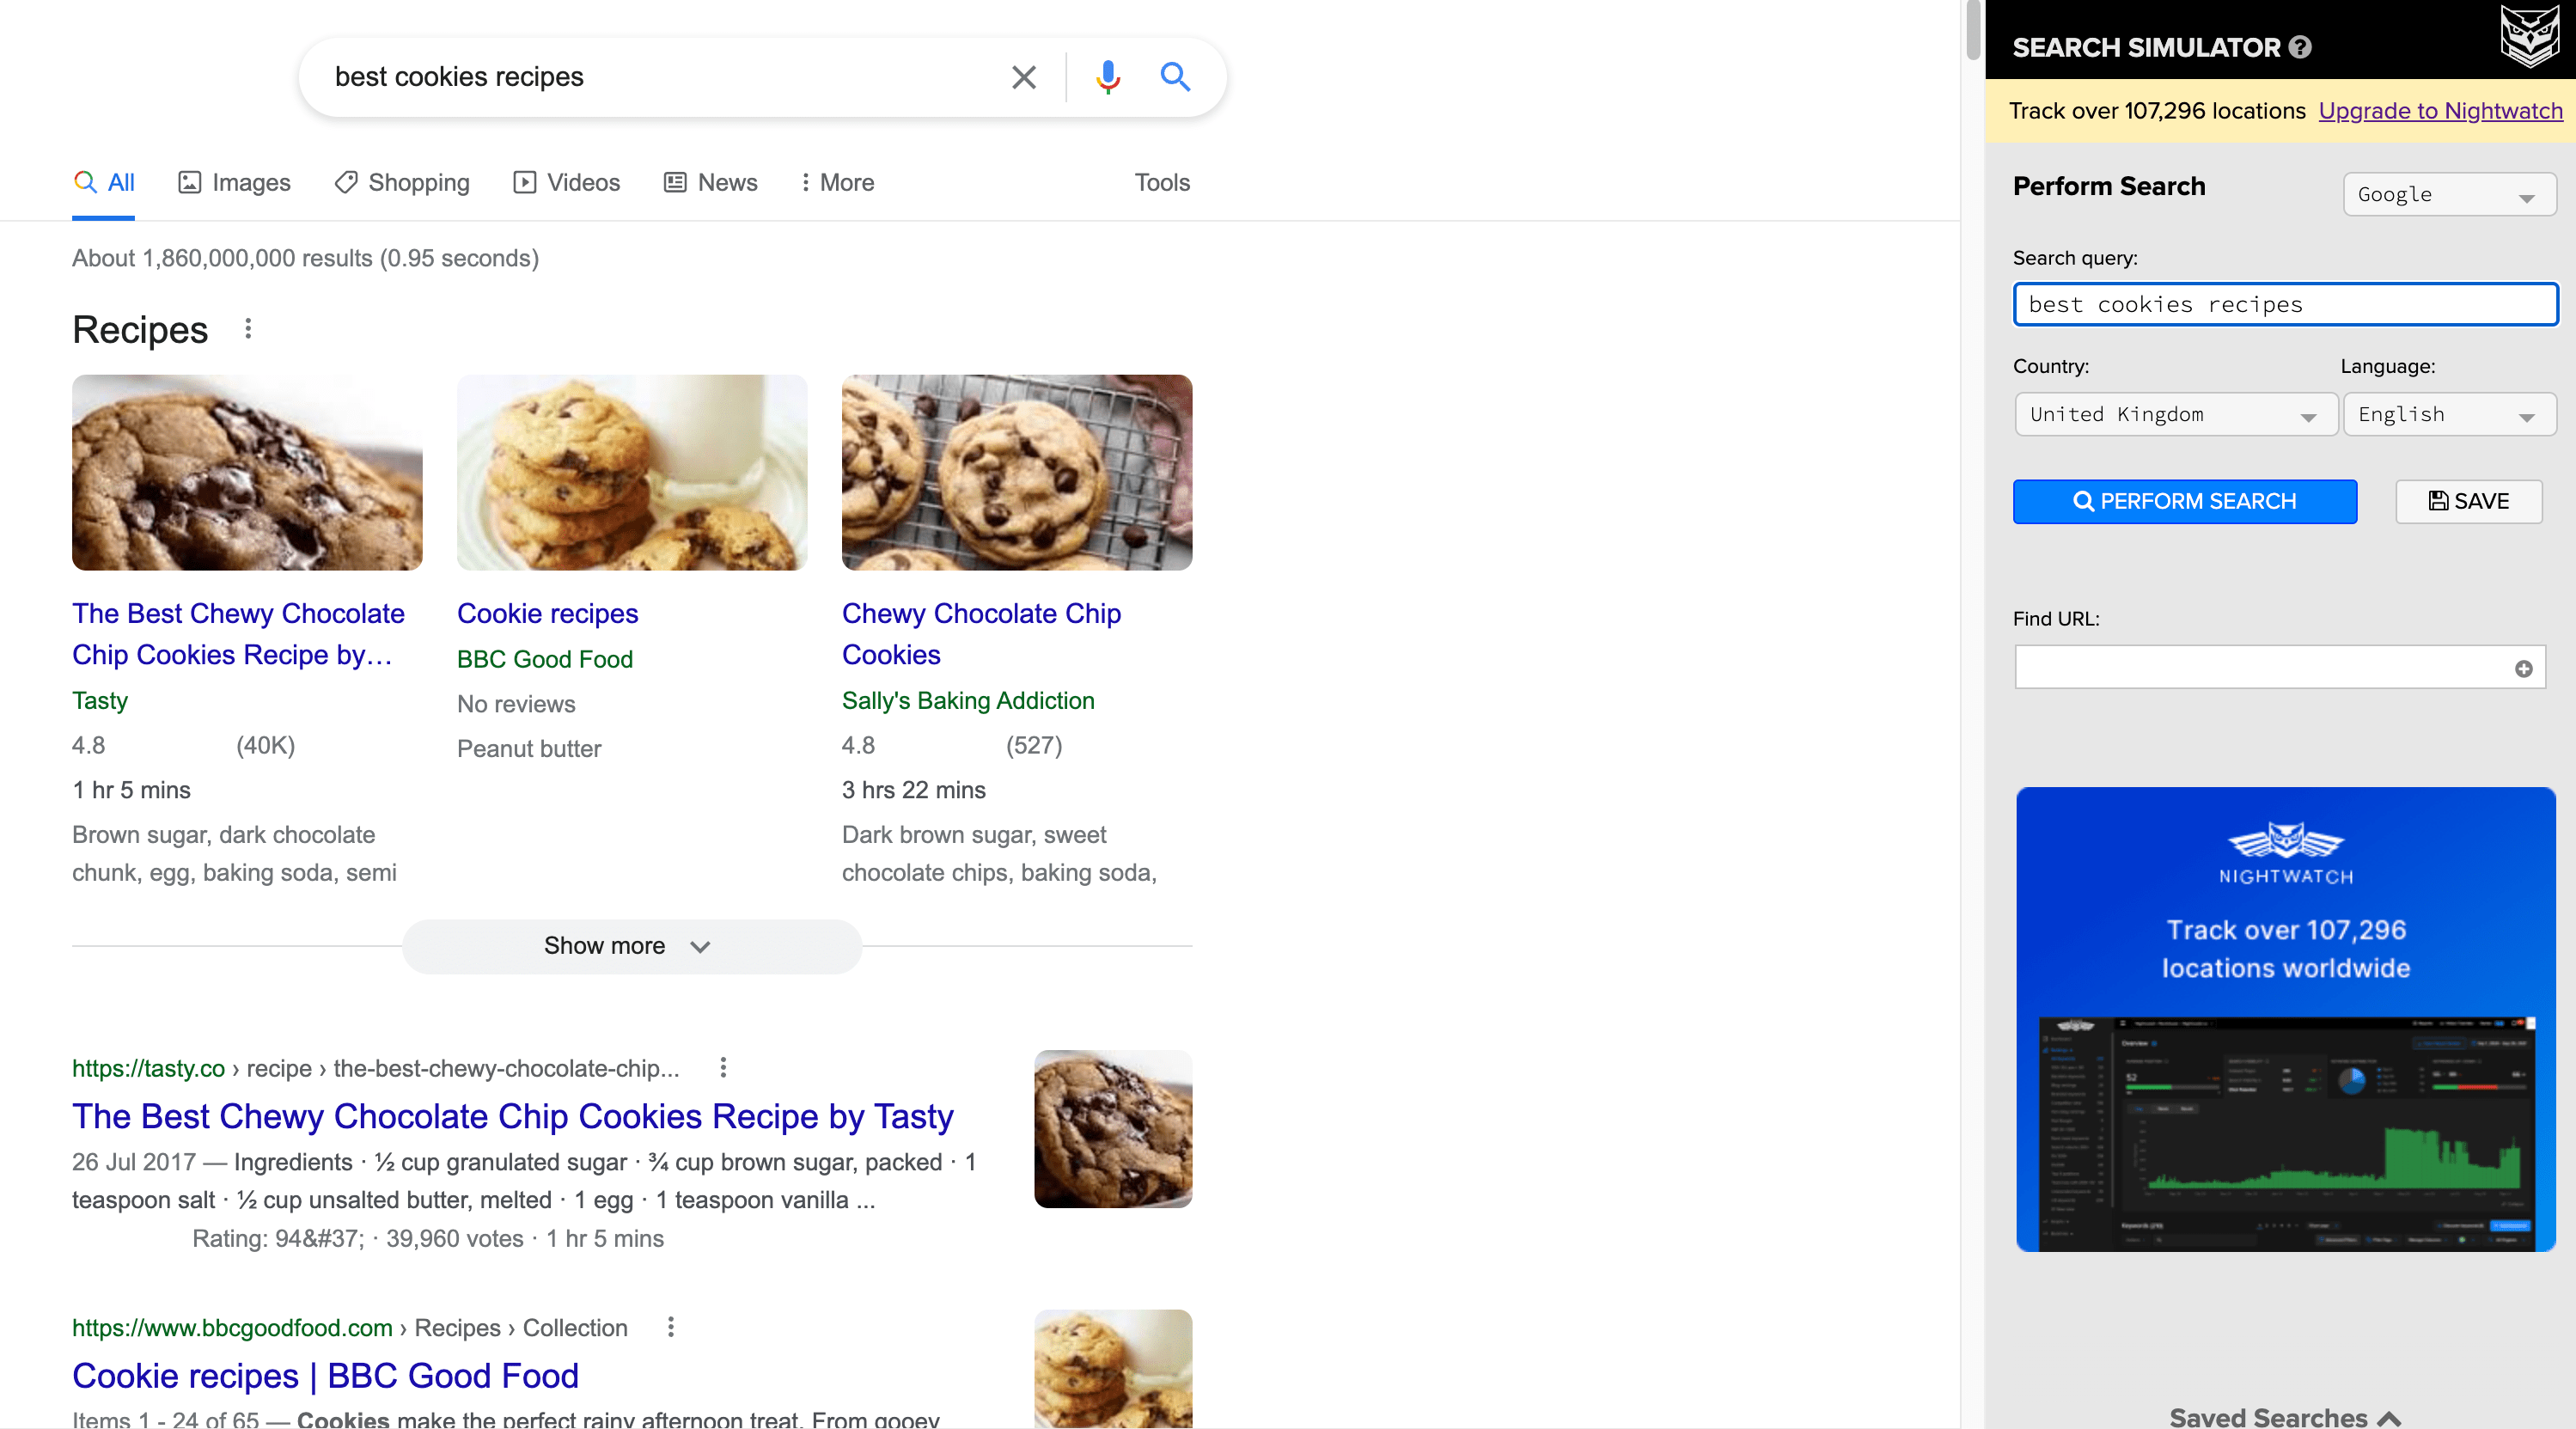 NightWatch search simulator for best cookies recipes query.